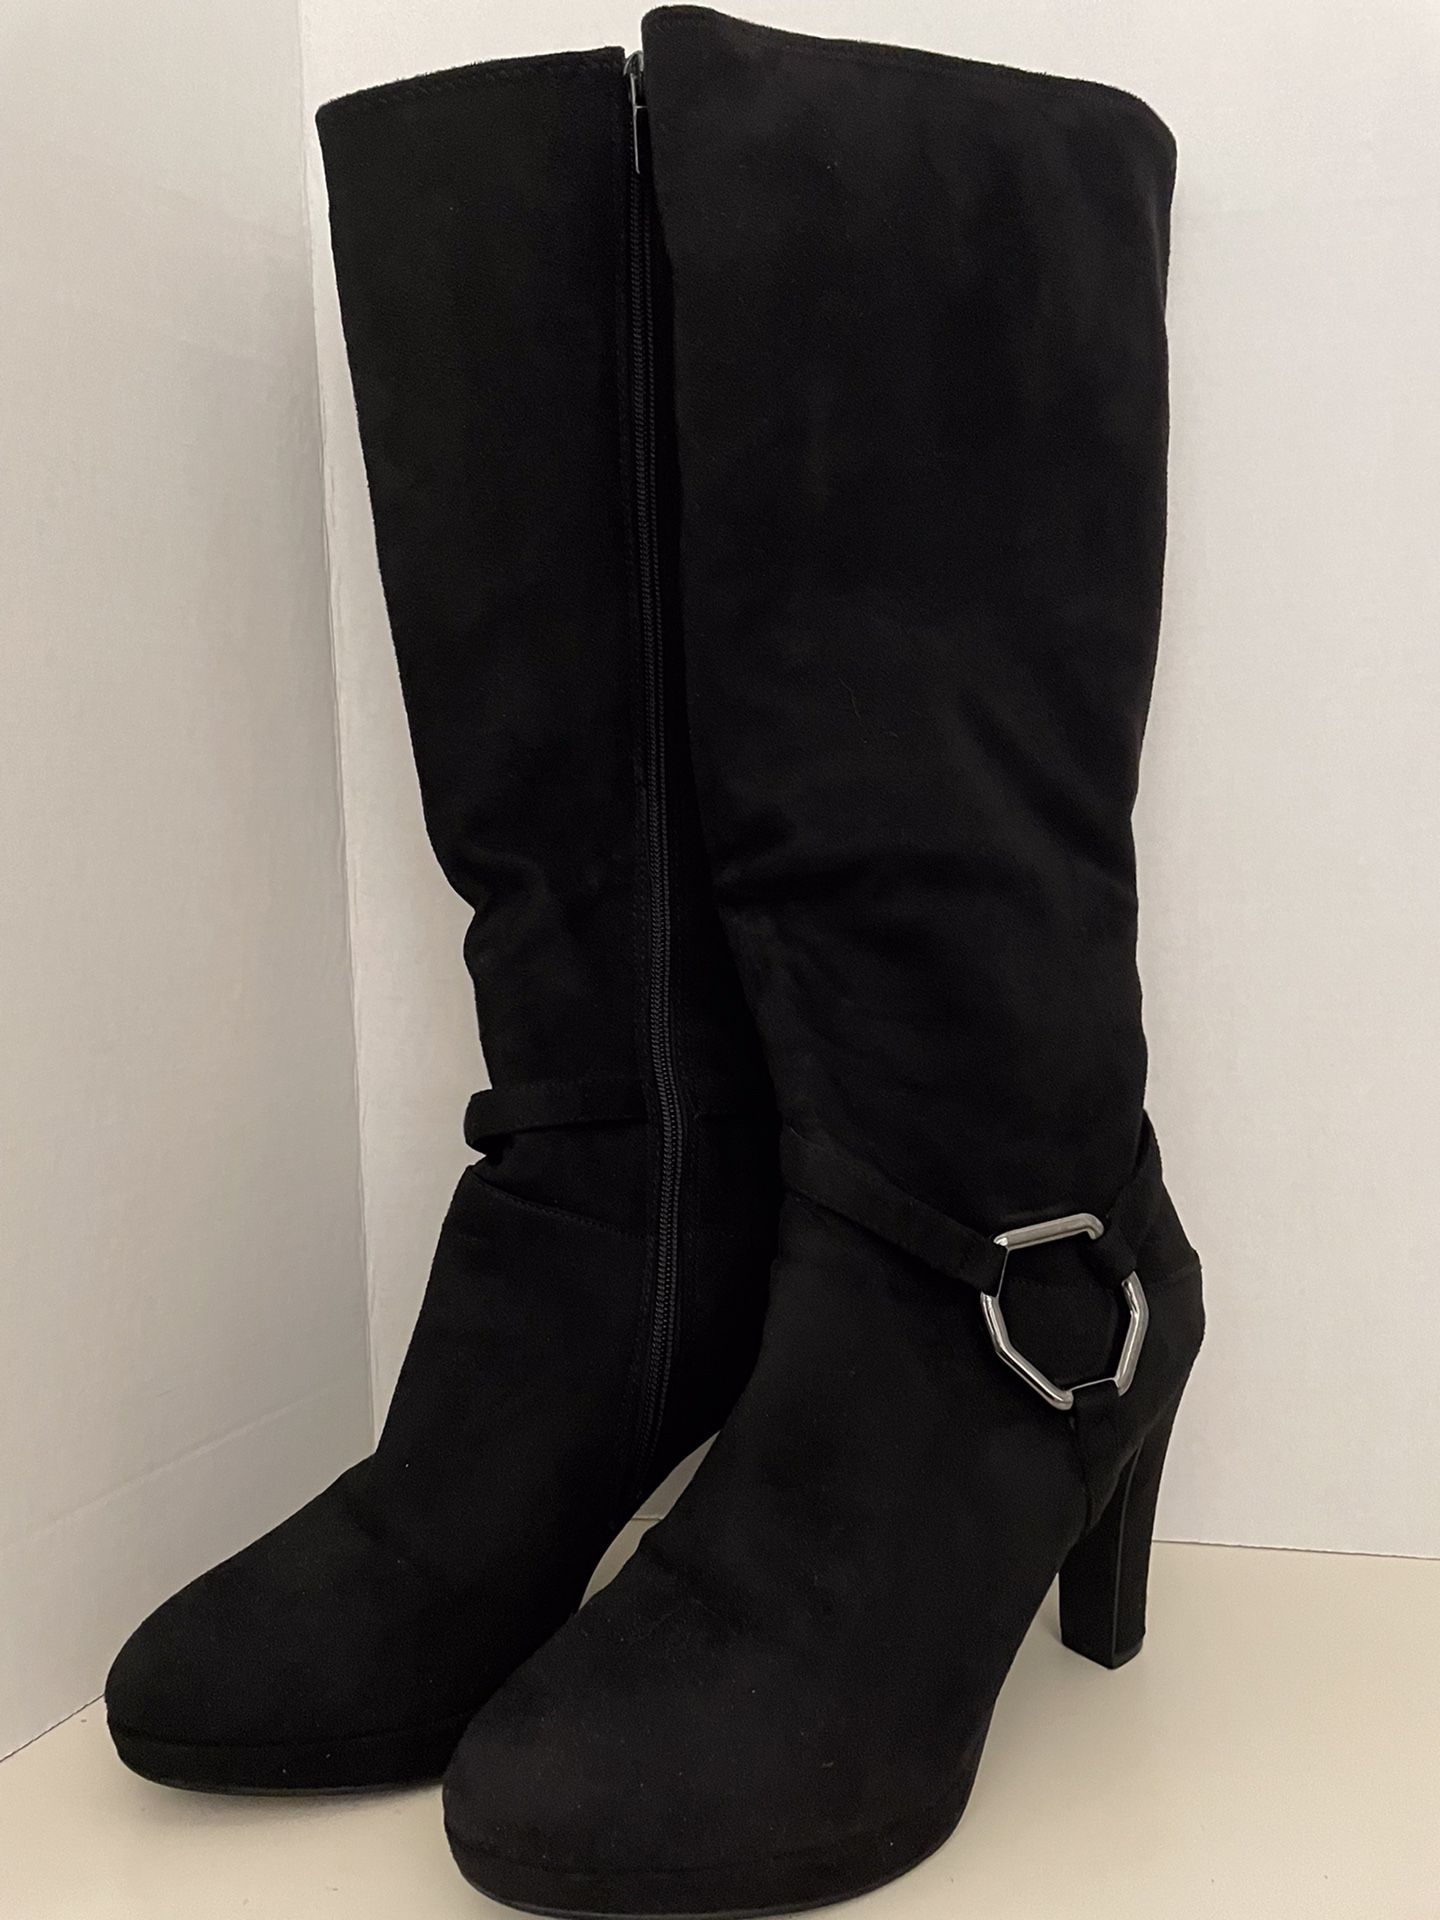 COACH AND FOUR Black Suede Boots with Gun Metal Ornament- Size 9.5